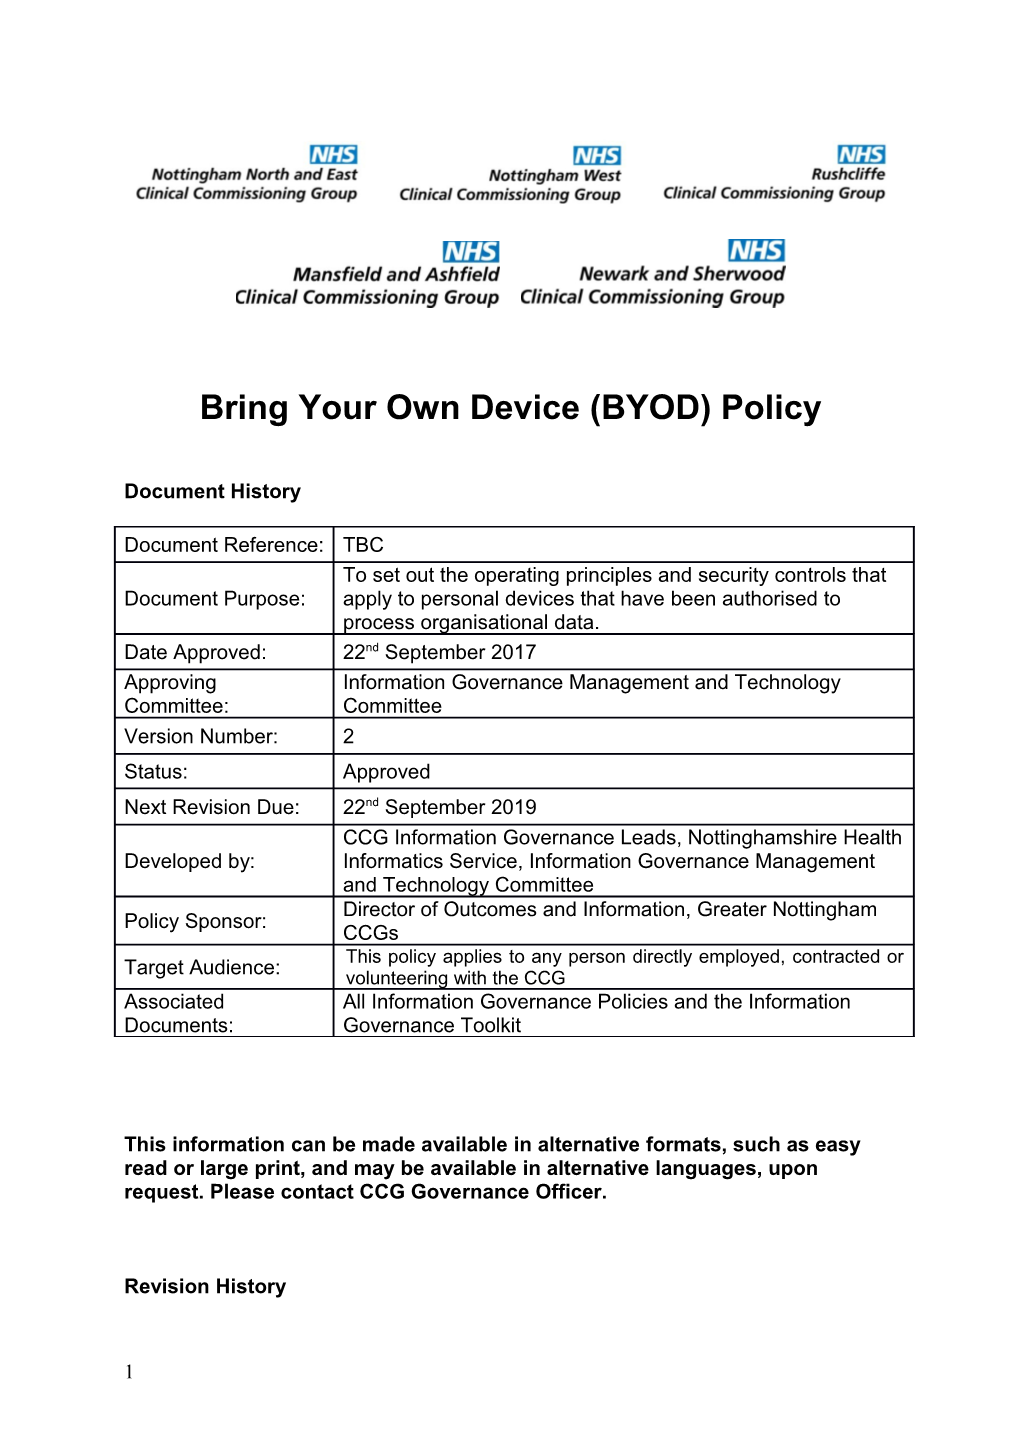 Bring Your Own Device (BYOD) Policy